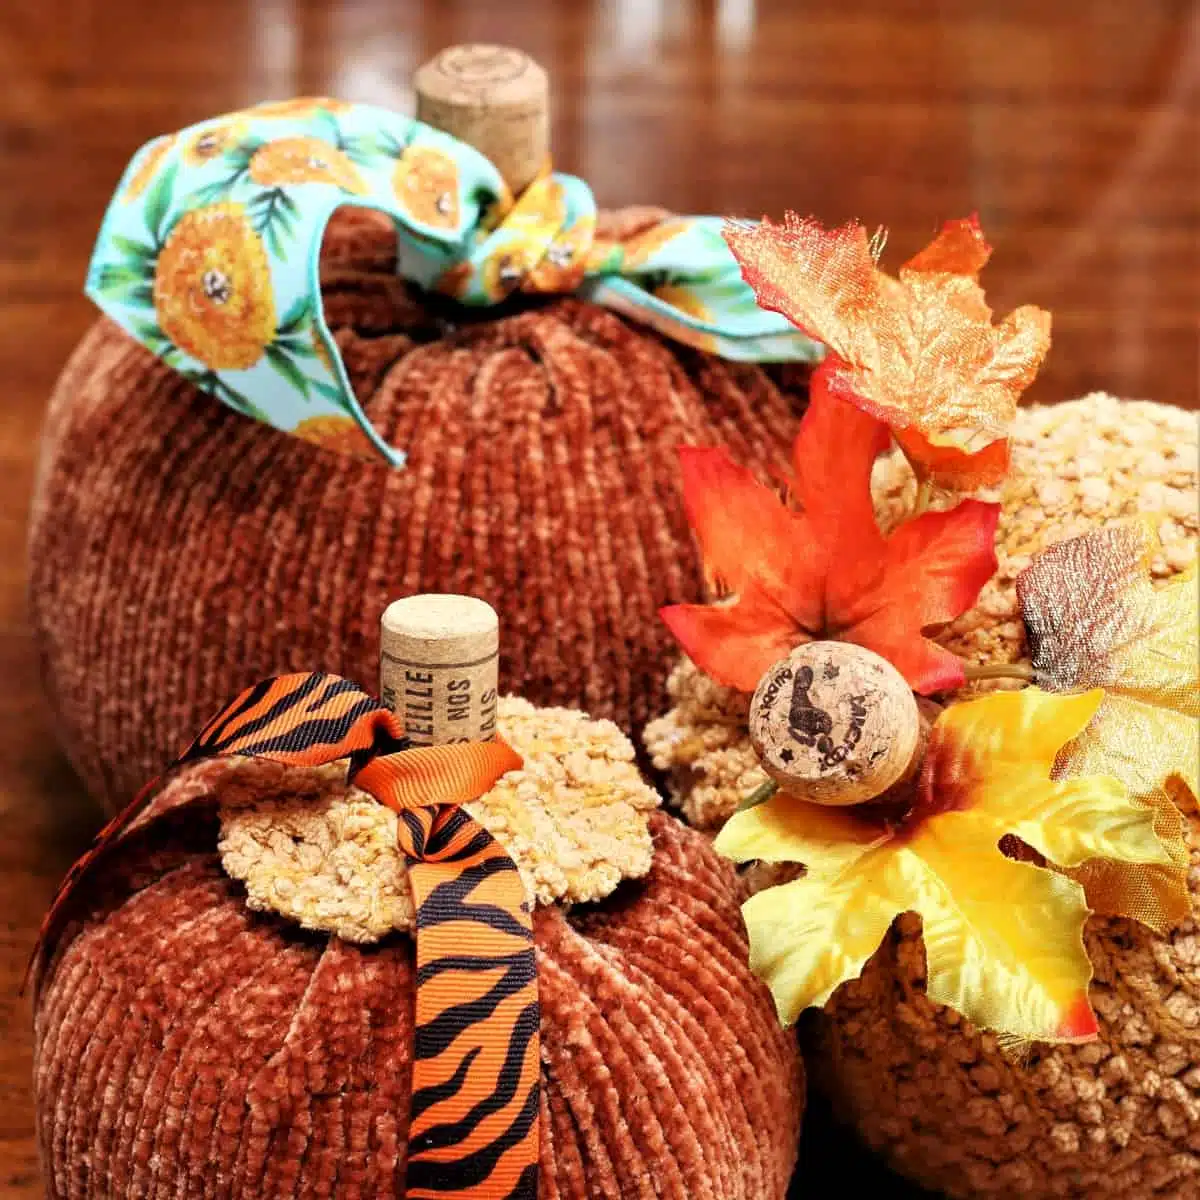 DIY Recycled Sweater Pumpkins With Wine Cork Stems